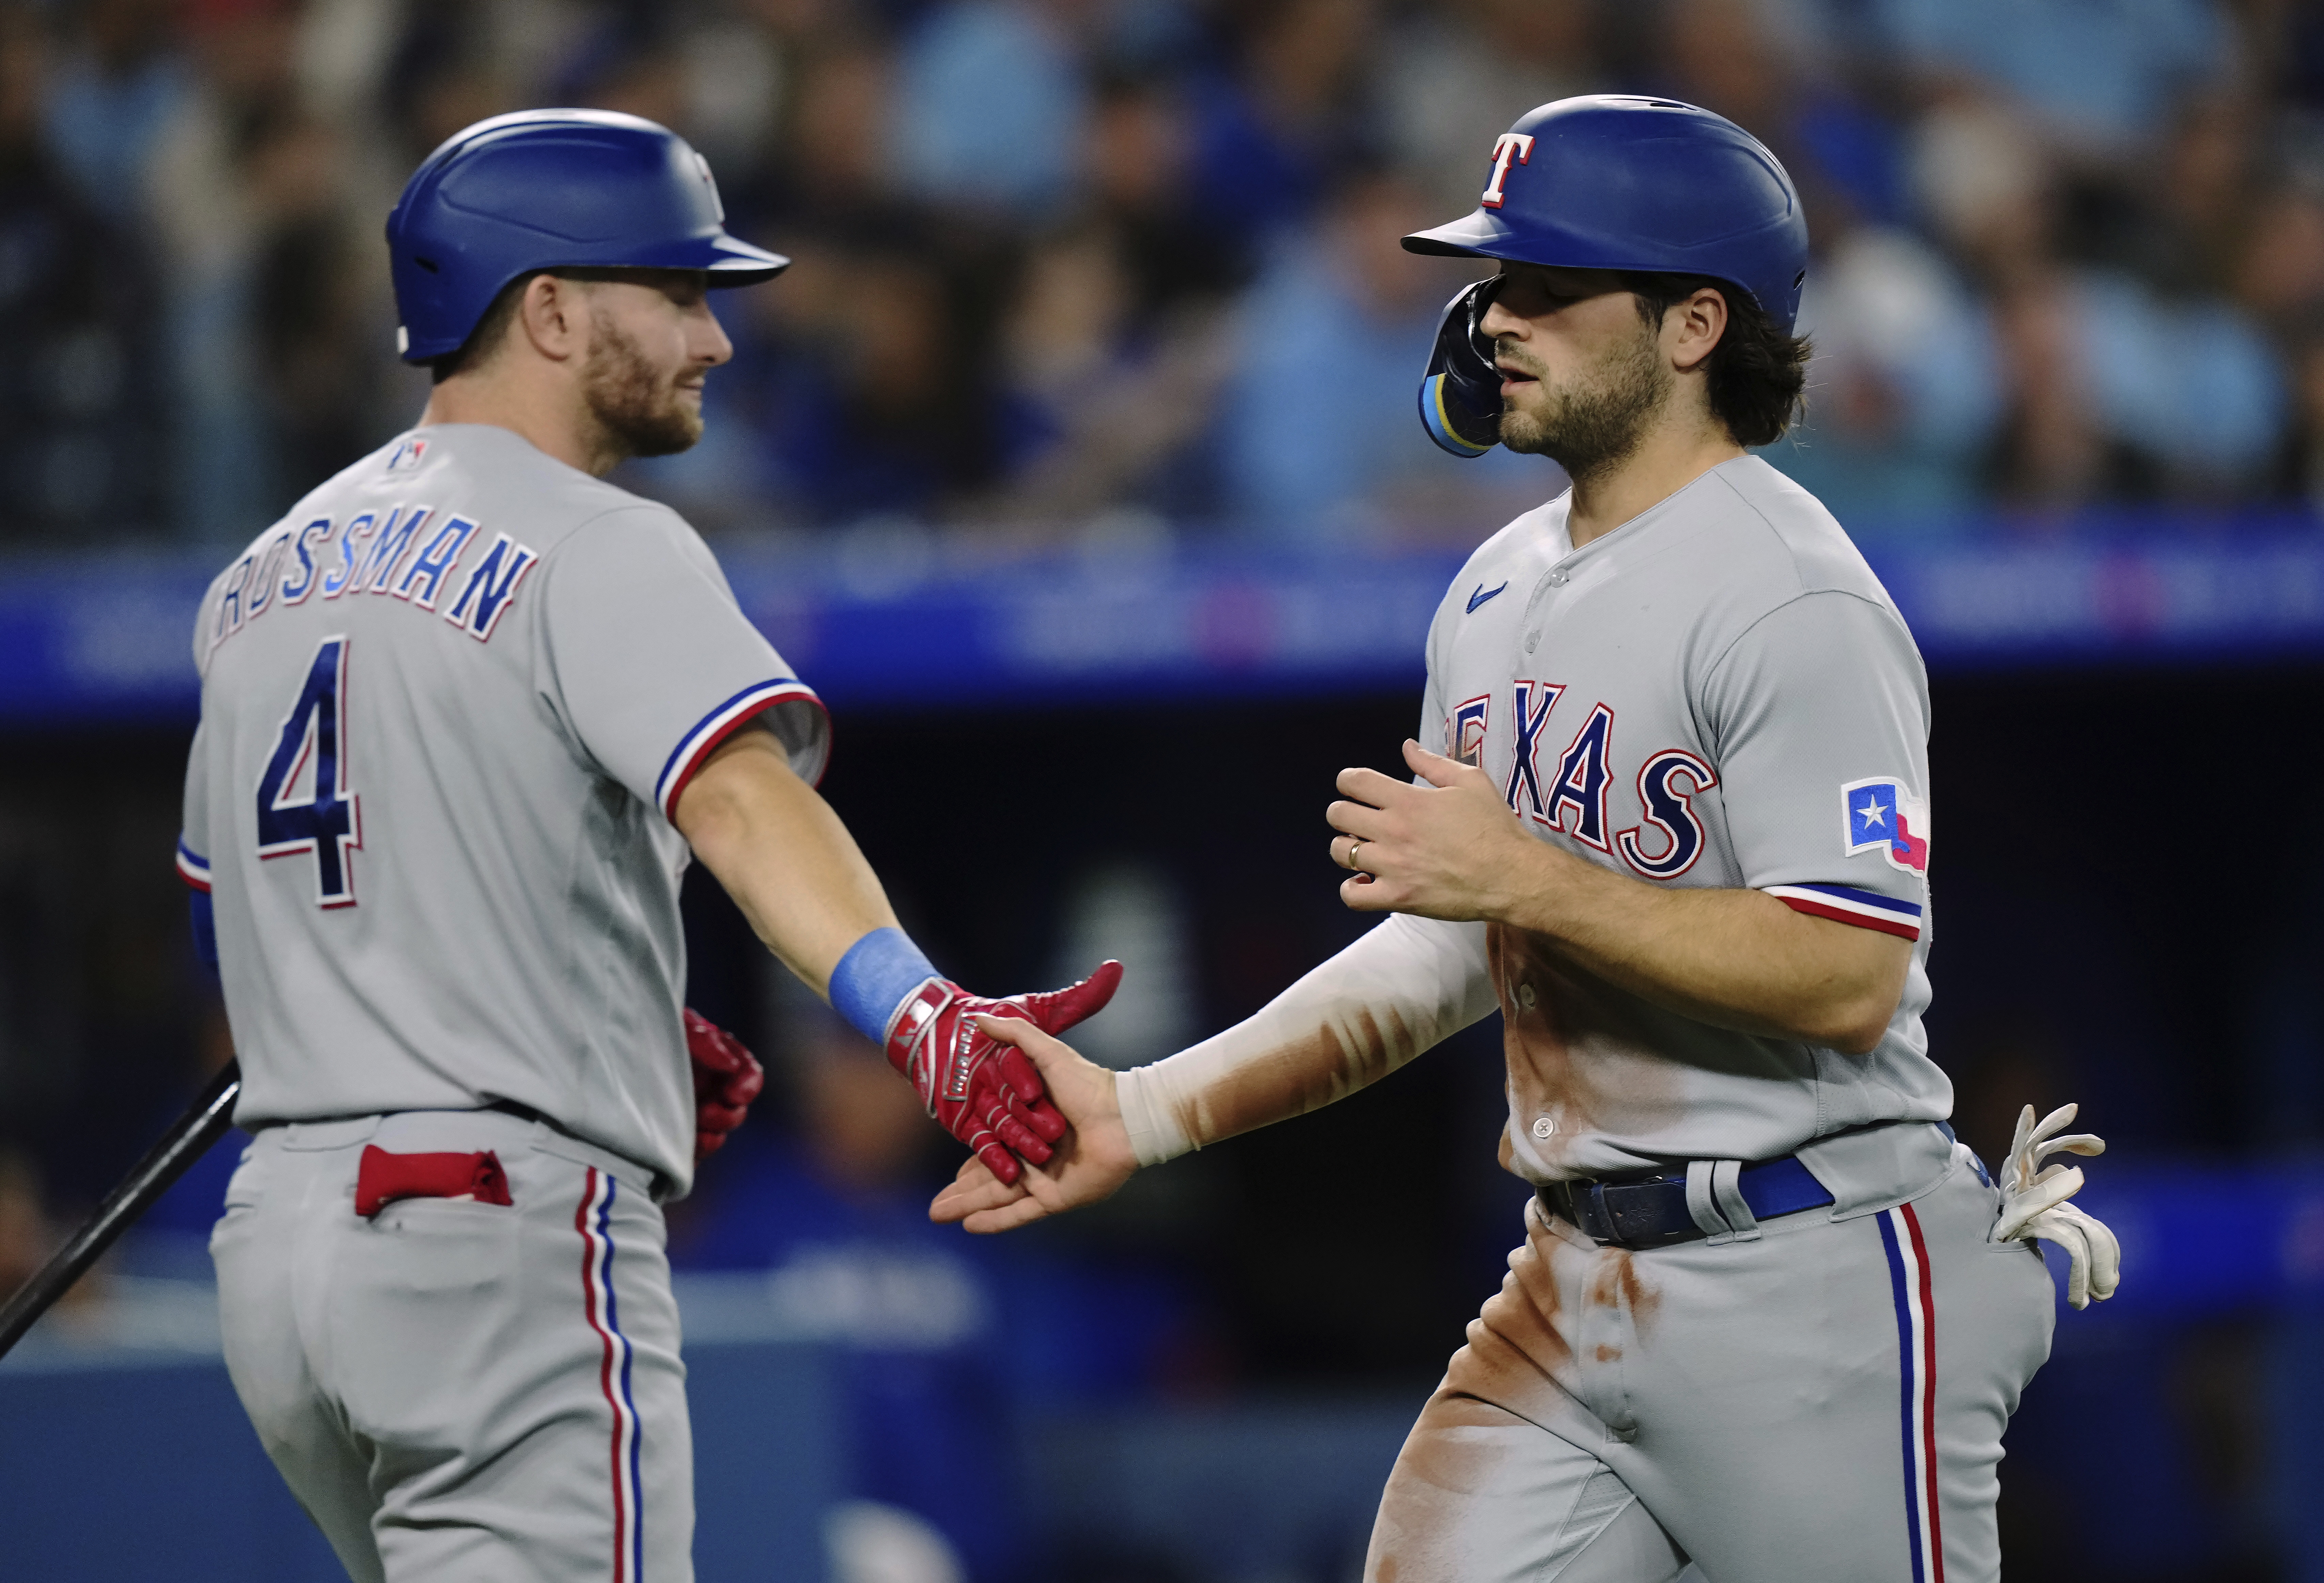 Rangers overcome Max Scherzer's early exit, leapfrog Blue Jays in